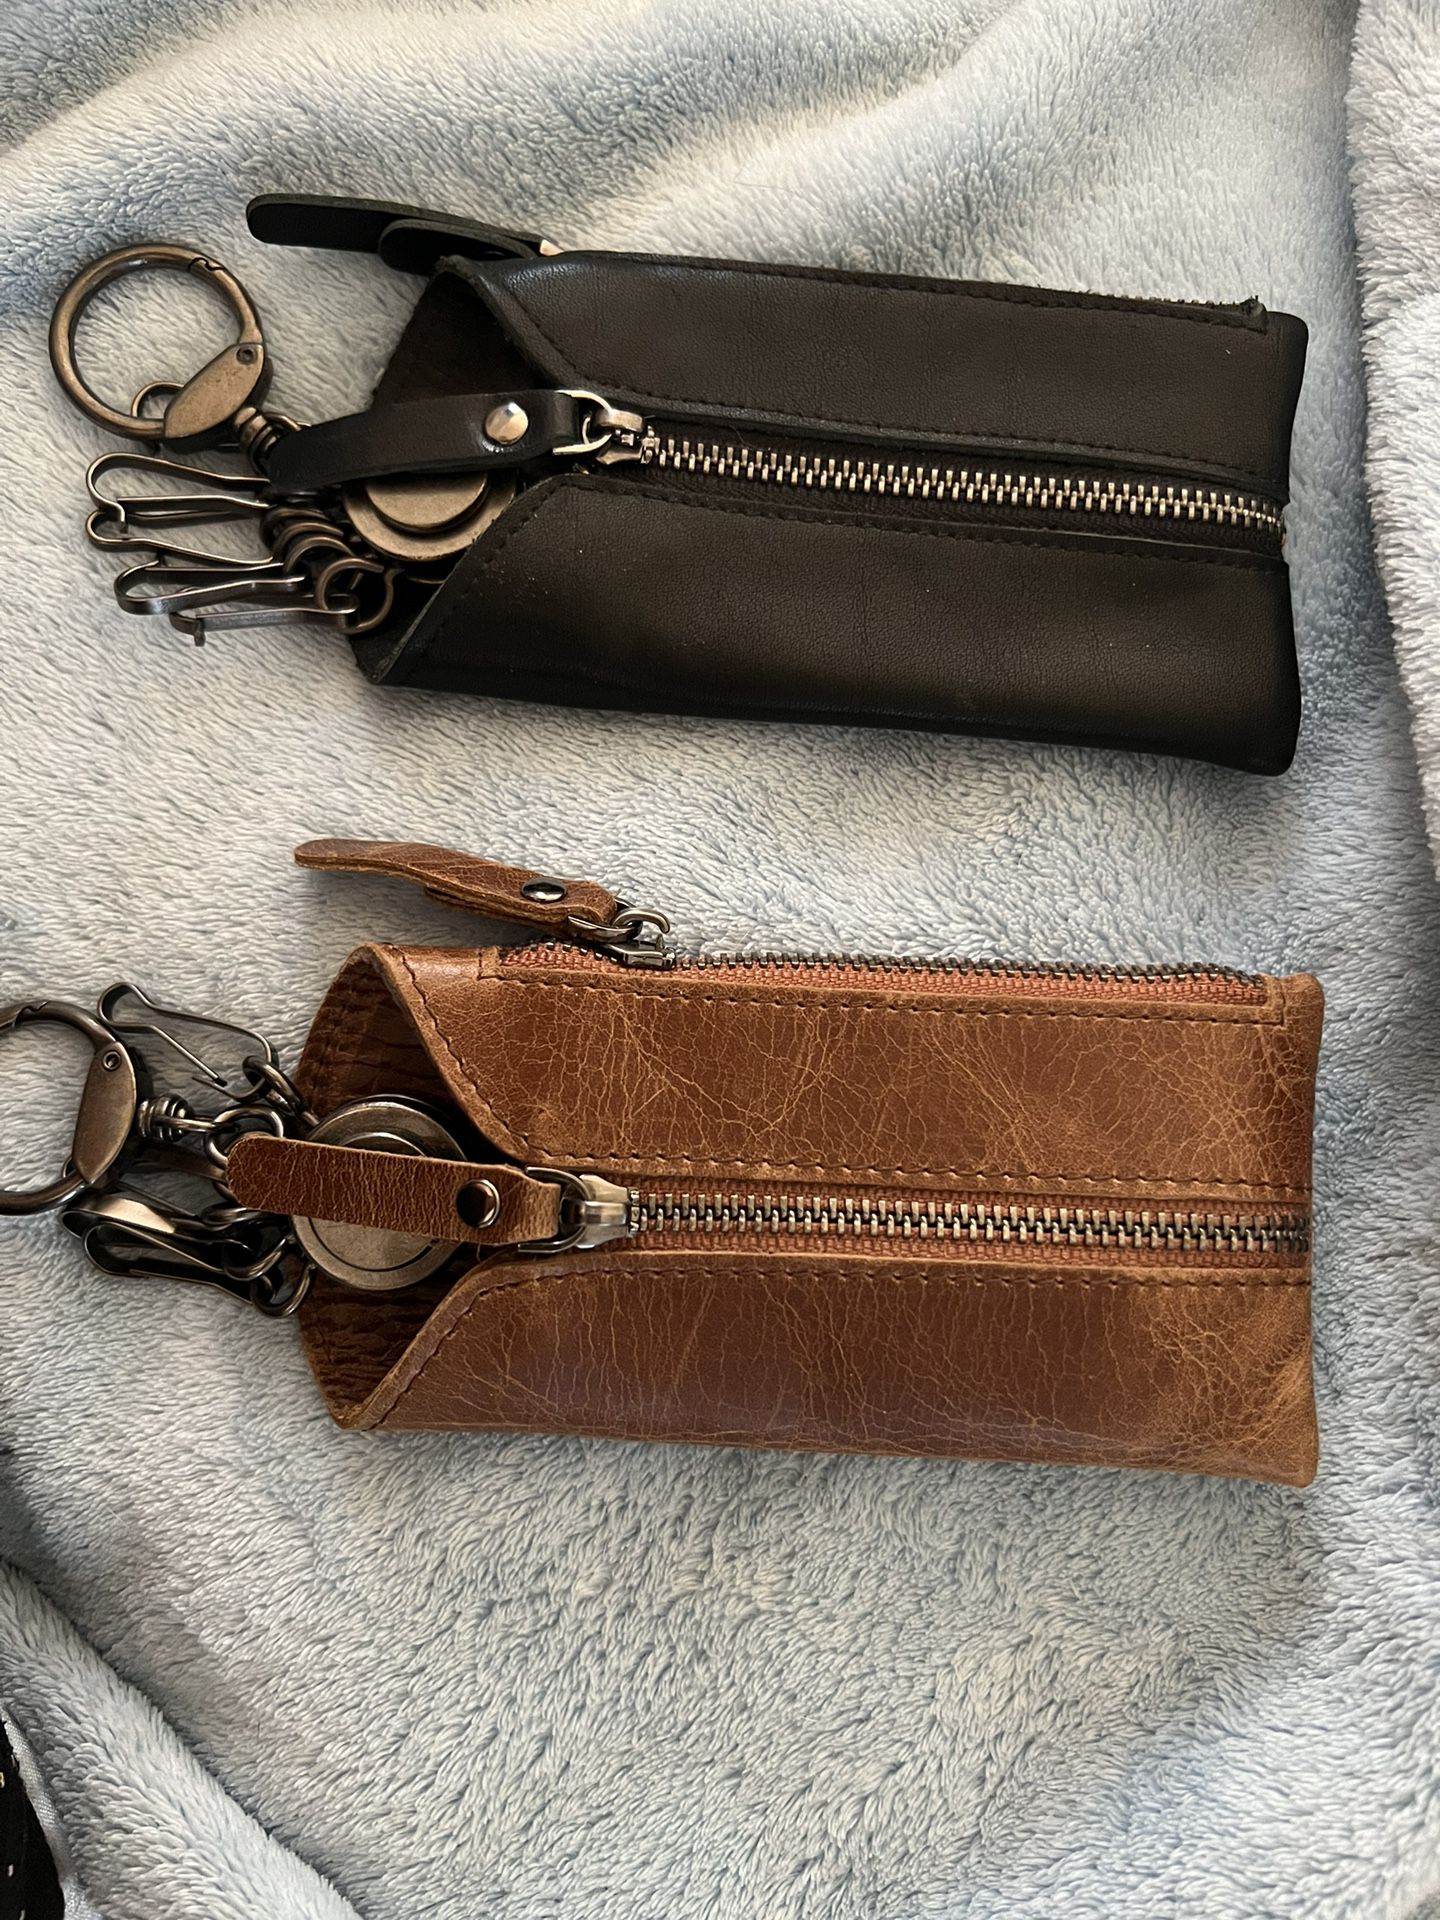 Genuine Leather Key Chain Wallets 2 One Black One Tan New 